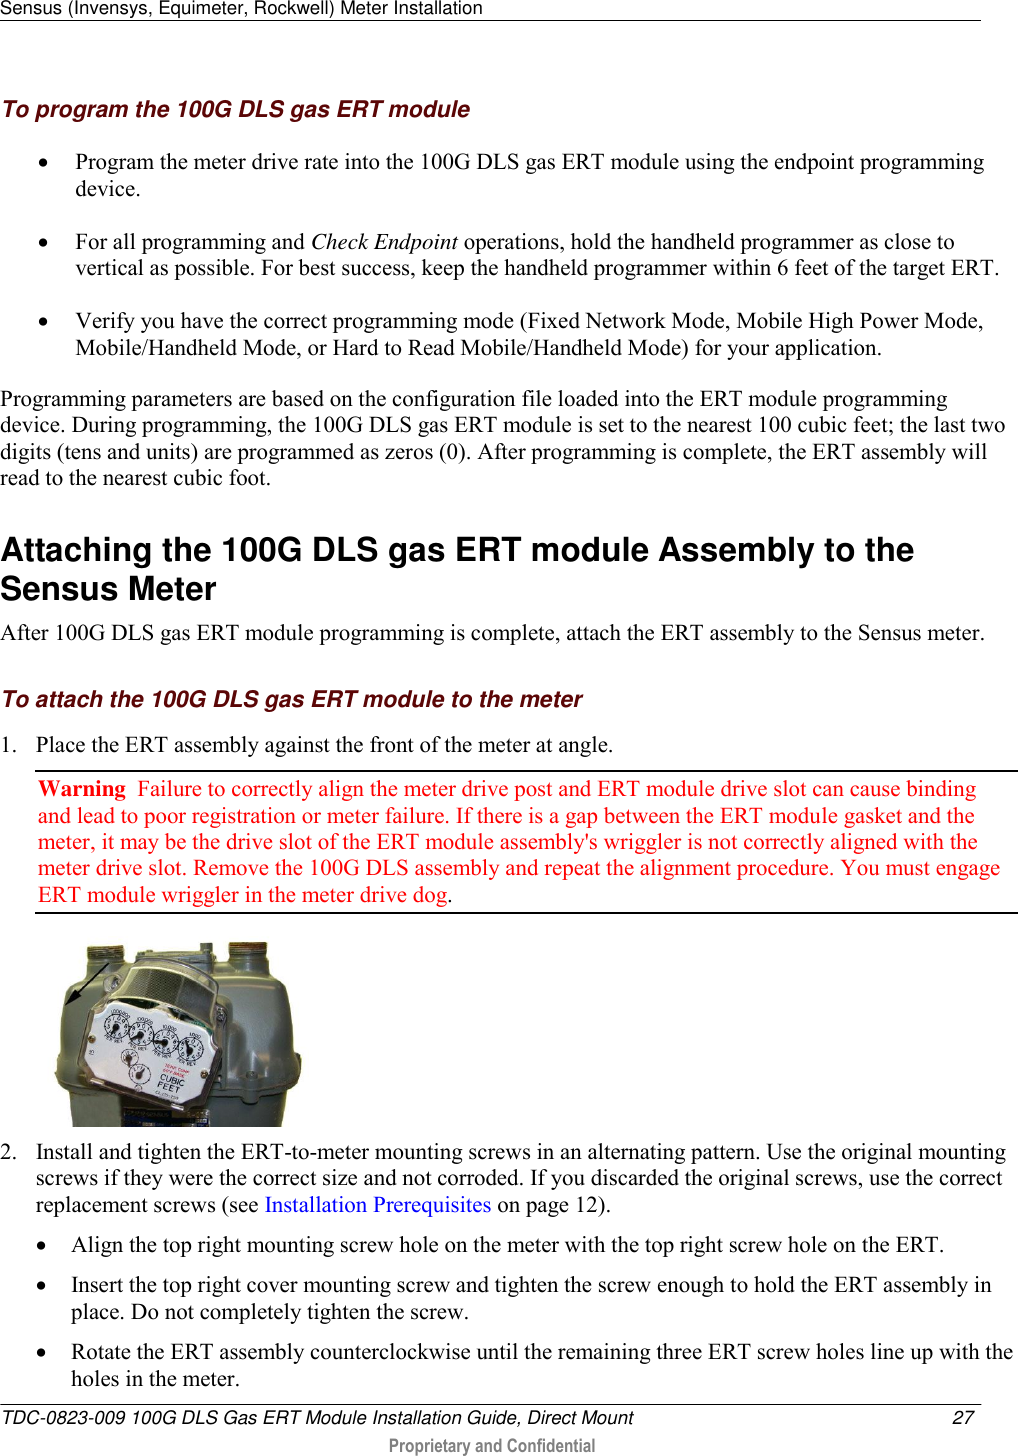 Sensus (Invensys, Equimeter, Rockwell) Meter Installation   TDC-0823-009 100G DLS Gas ERT Module Installation Guide, Direct Mount  27   Proprietary and Confidential     To program the 100G DLS gas ERT module  Program the meter drive rate into the 100G DLS gas ERT module using the endpoint programming device.   For all programming and Check Endpoint operations, hold the handheld programmer as close to vertical as possible. For best success, keep the handheld programmer within 6 feet of the target ERT.   Verify you have the correct programming mode (Fixed Network Mode, Mobile High Power Mode, Mobile/Handheld Mode, or Hard to Read Mobile/Handheld Mode) for your application.  Programming parameters are based on the configuration file loaded into the ERT module programming device. During programming, the 100G DLS gas ERT module is set to the nearest 100 cubic feet; the last two digits (tens and units) are programmed as zeros (0). After programming is complete, the ERT assembly will read to the nearest cubic foot.   Attaching the 100G DLS gas ERT module Assembly to the Sensus Meter After 100G DLS gas ERT module programming is complete, attach the ERT assembly to the Sensus meter.  To attach the 100G DLS gas ERT module to the meter 1. Place the ERT assembly against the front of the meter at angle.  Warning  Failure to correctly align the meter drive post and ERT module drive slot can cause binding and lead to poor registration or meter failure. If there is a gap between the ERT module gasket and the meter, it may be the drive slot of the ERT module assembly&apos;s wriggler is not correctly aligned with the meter drive slot. Remove the 100G DLS assembly and repeat the alignment procedure. You must engage ERT module wriggler in the meter drive dog.   2. Install and tighten the ERT-to-meter mounting screws in an alternating pattern. Use the original mounting screws if they were the correct size and not corroded. If you discarded the original screws, use the correct replacement screws (see Installation Prerequisites on page 12).  Align the top right mounting screw hole on the meter with the top right screw hole on the ERT.   Insert the top right cover mounting screw and tighten the screw enough to hold the ERT assembly in place. Do not completely tighten the screw.   Rotate the ERT assembly counterclockwise until the remaining three ERT screw holes line up with the holes in the meter.   